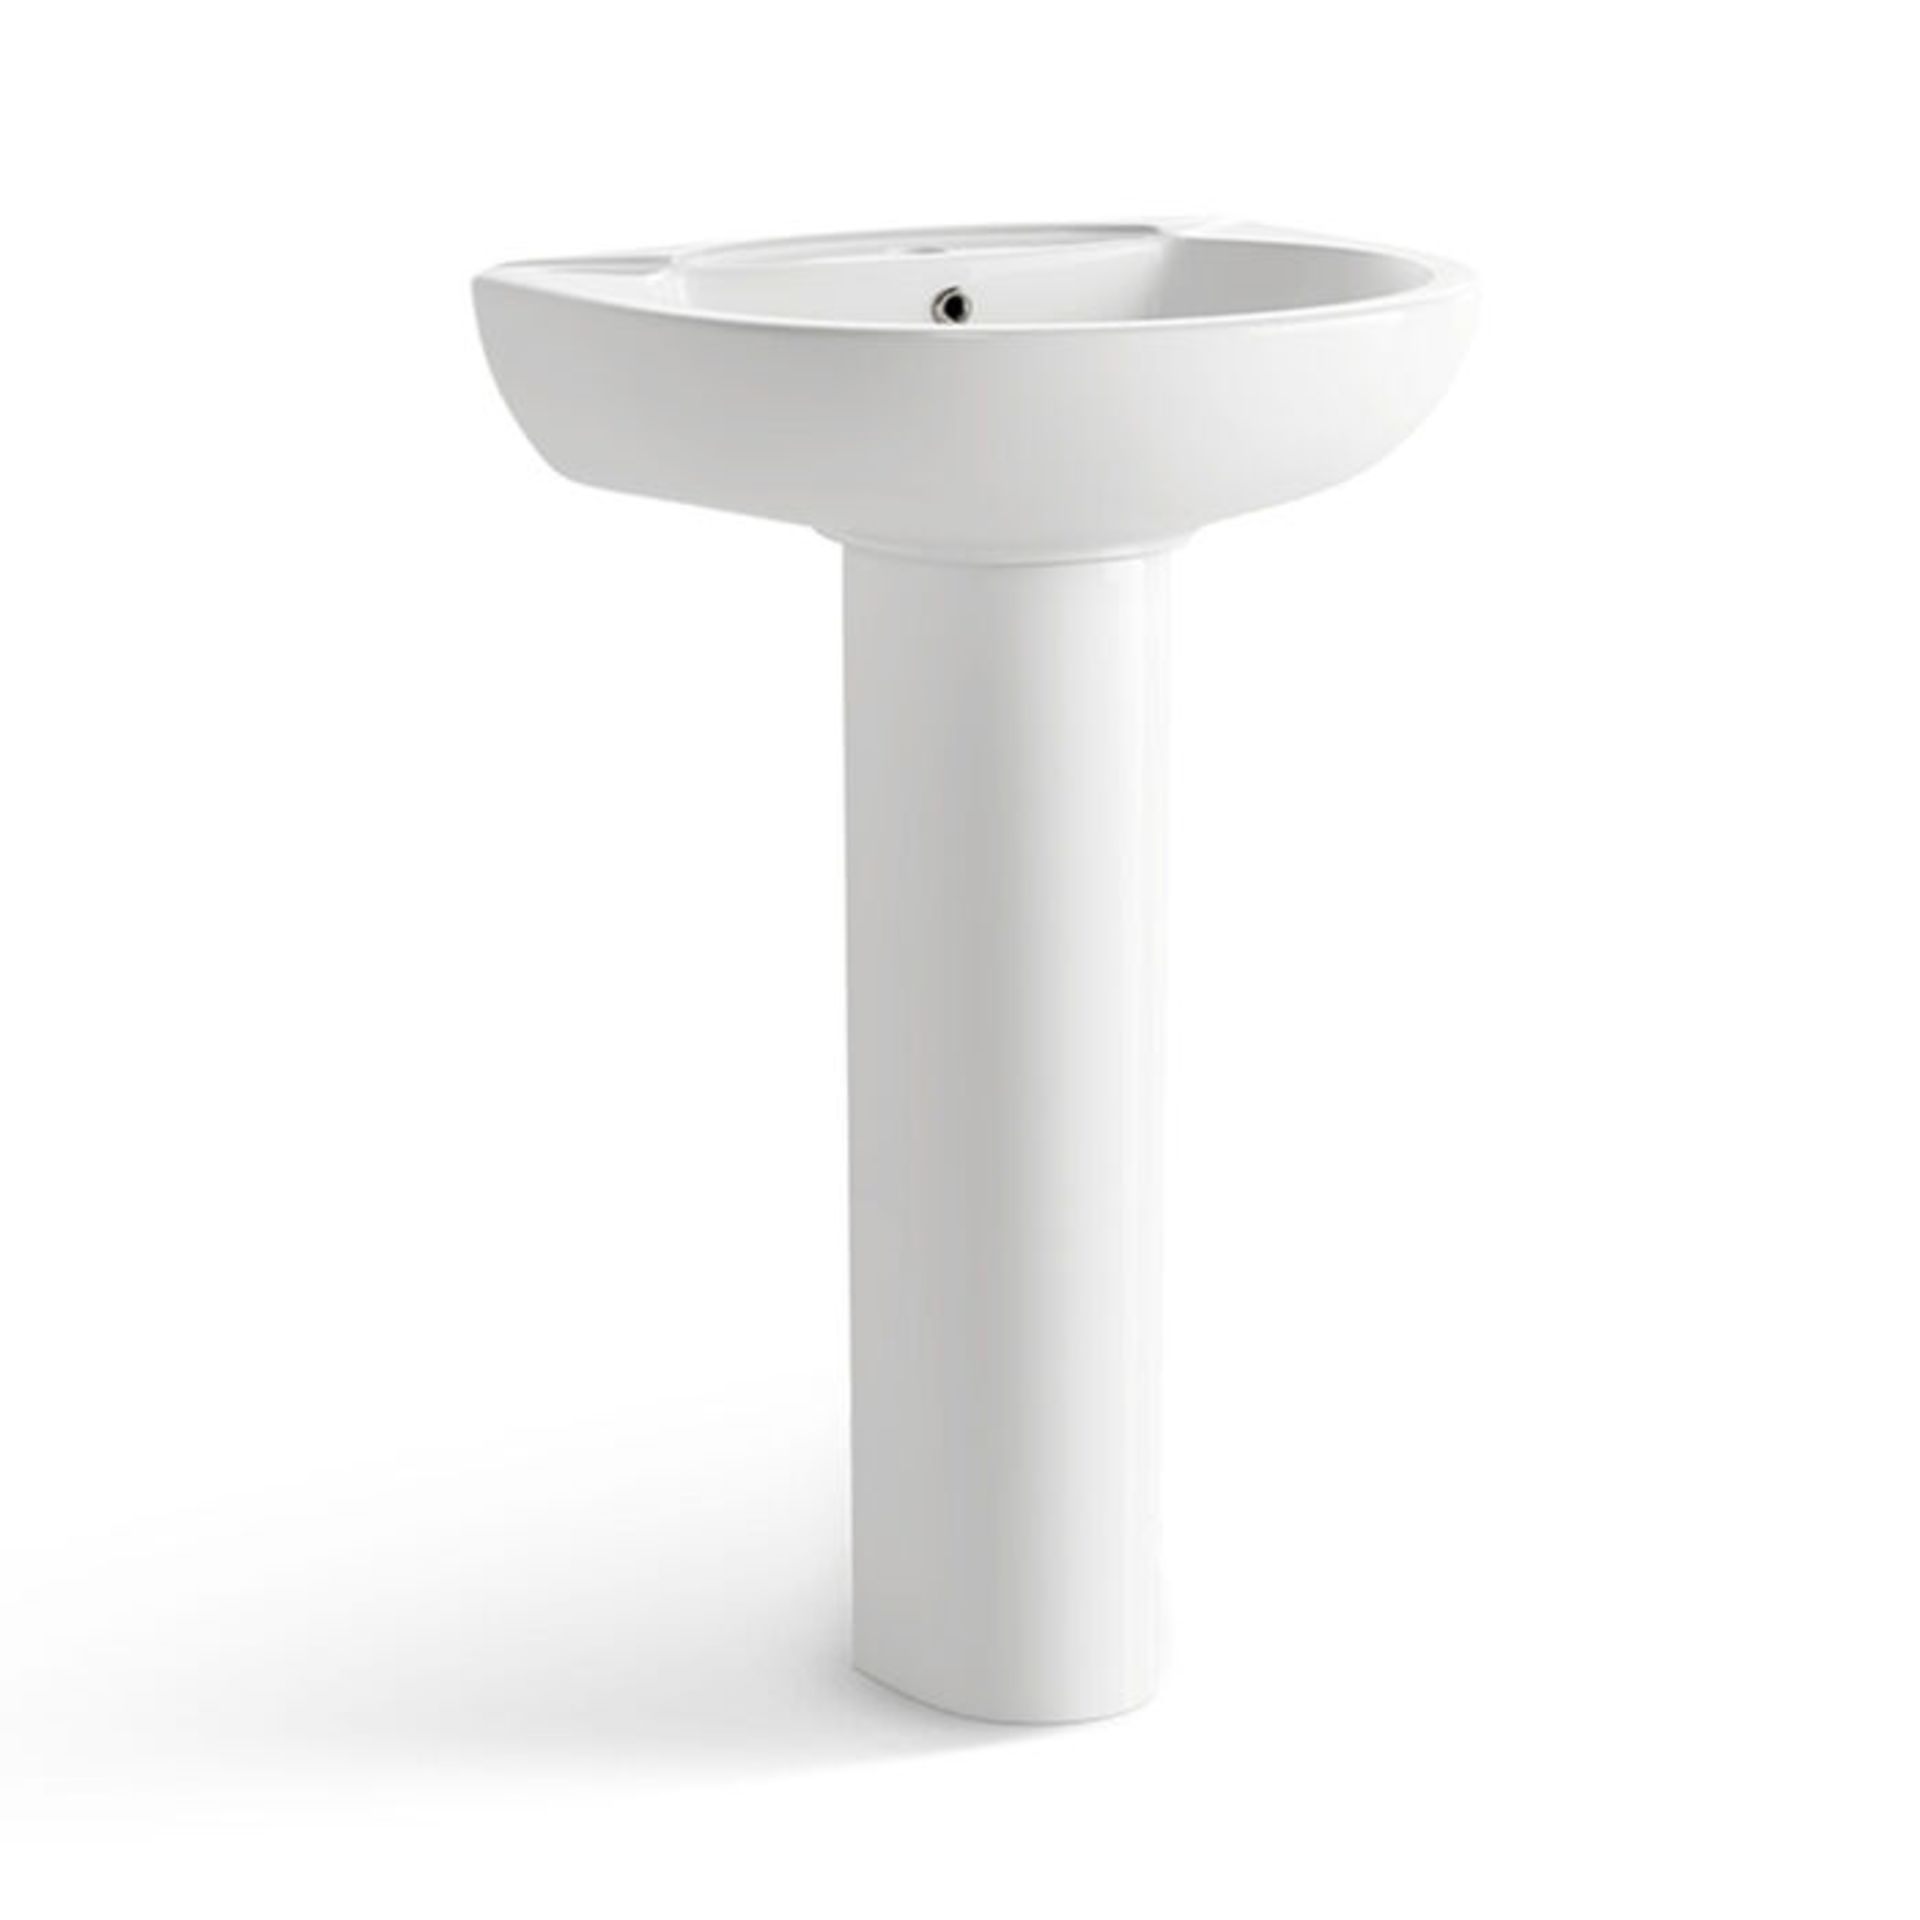 Sink & Pedestal - Single Tap Hole. Made from White Vitreous China and finished with a high glos... - Image 2 of 2